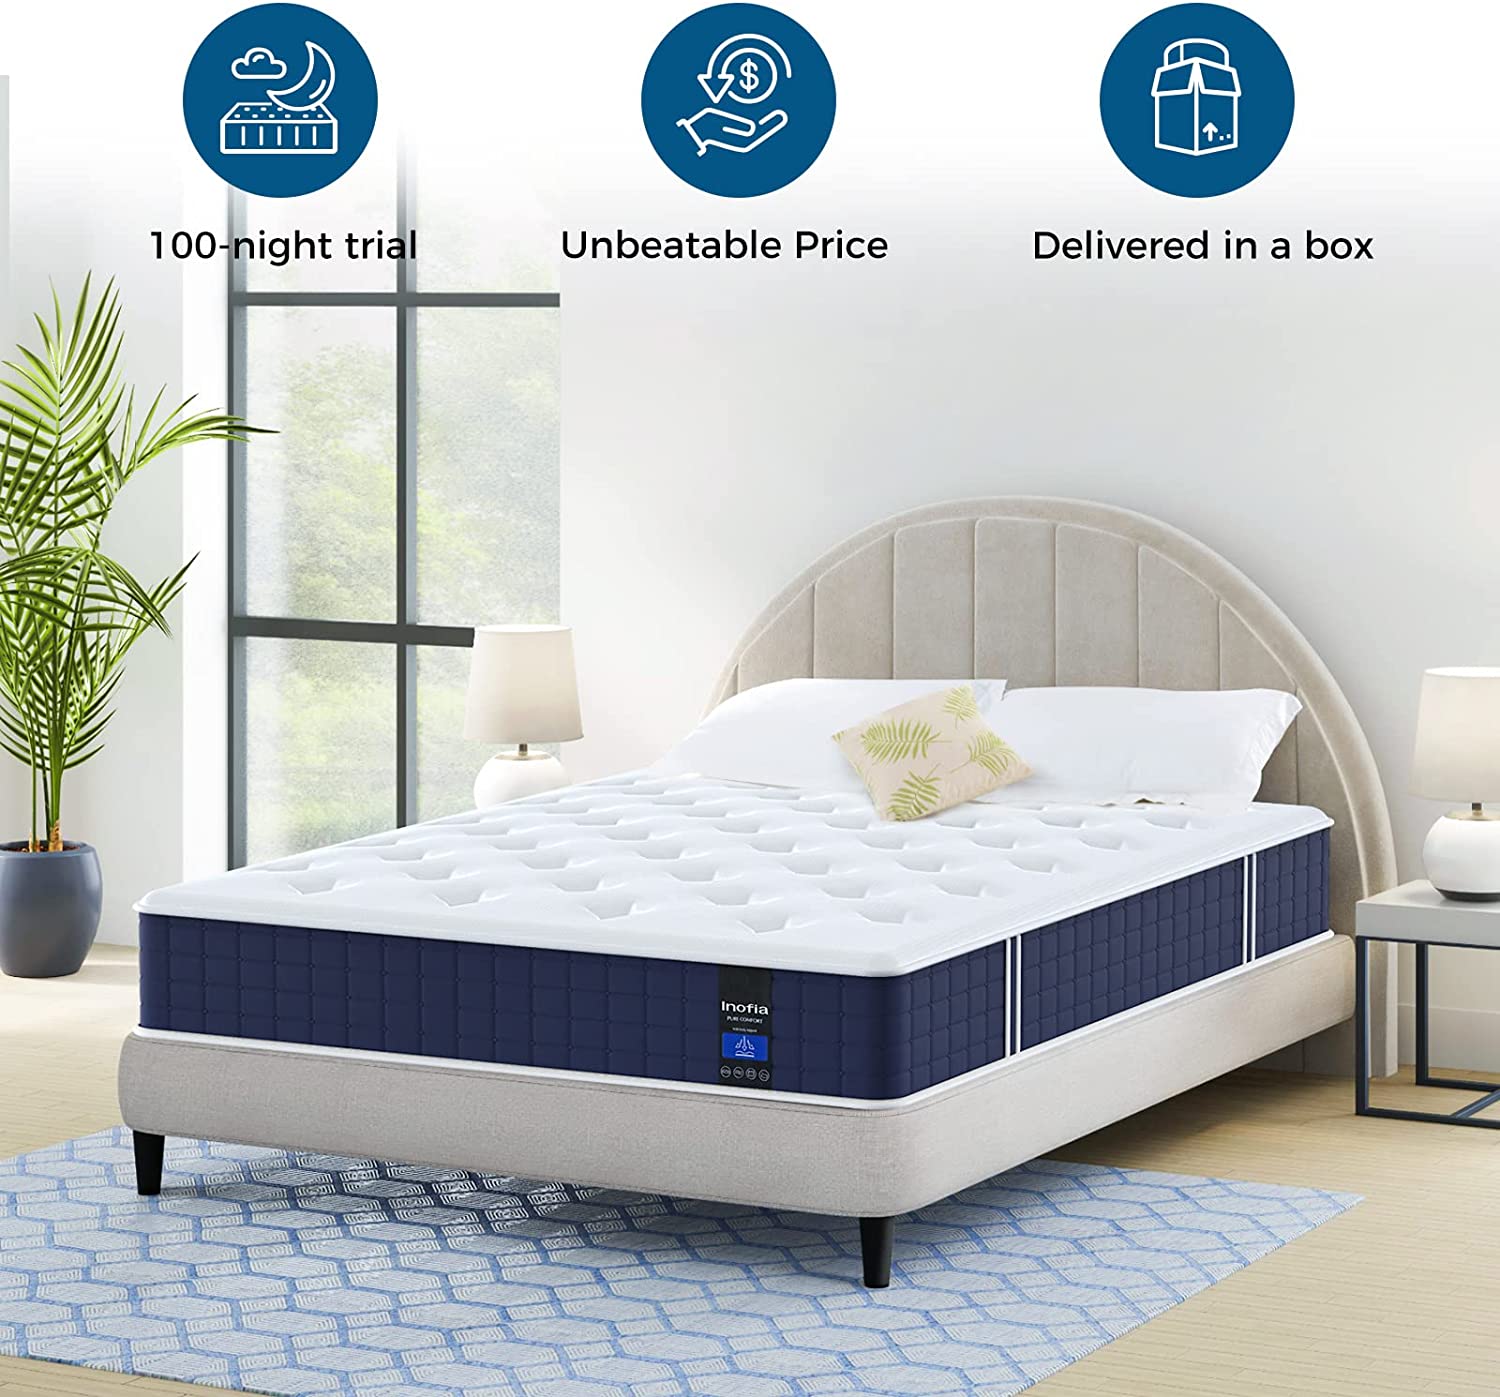 Inofia Double Mattresses 9 Inch Hybrid Mattress Double Size Pocket Sprung Memory Foam Mattress Bed in a Box Dry Comfort Sleep with Medium Firm Pressure Relief, The Snooze Button Collection